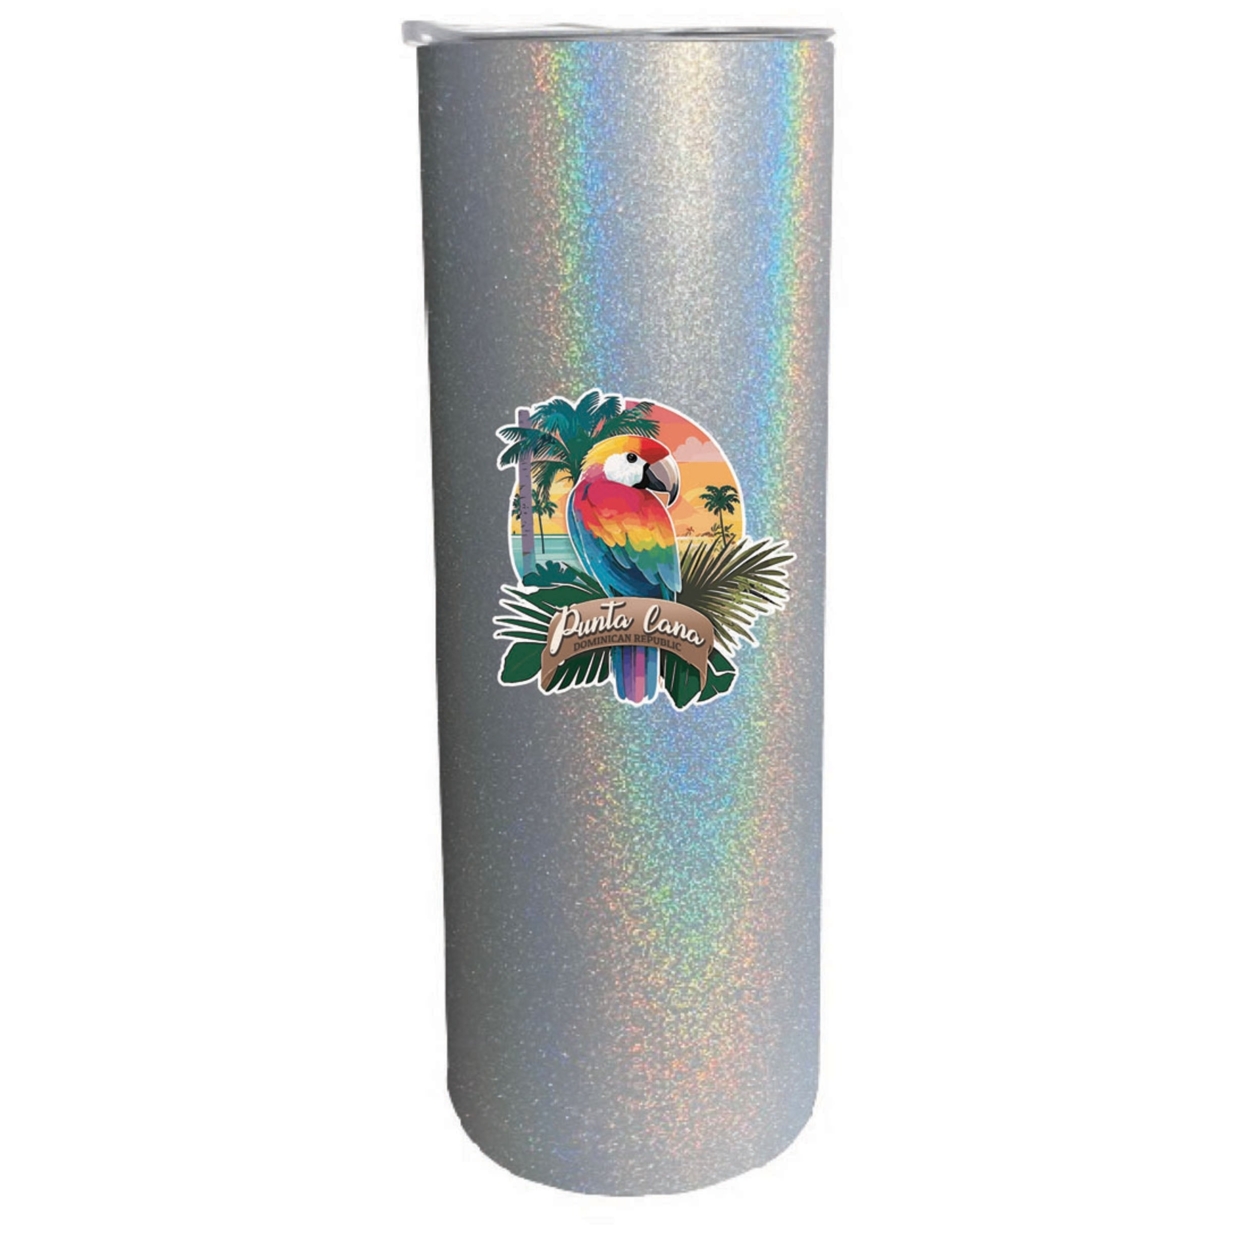 Punta Cana Dominican Republic Souvenir 20 Oz Insulated Stainless Steel Skinny Tumbler - Black, PARROT